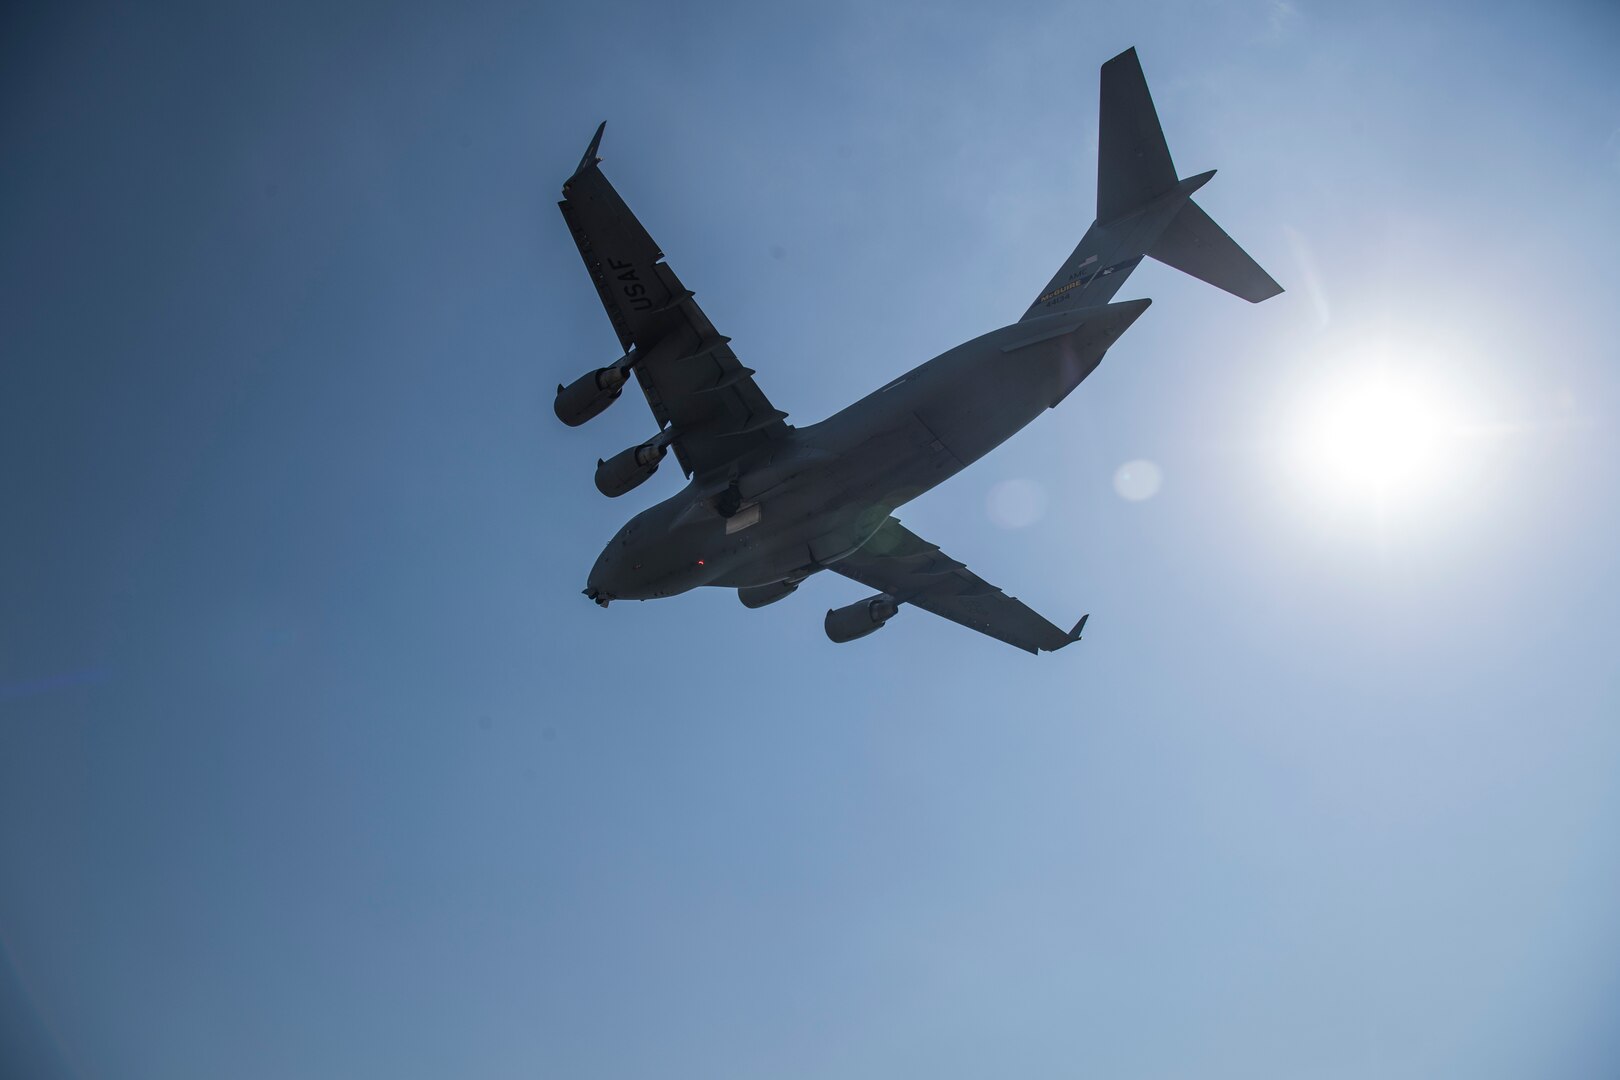 A C-17 Globemaster III delivers humanitarian aid from Homestead Air Reserve Base, FL to Cucuta, Colombia February 16, 201